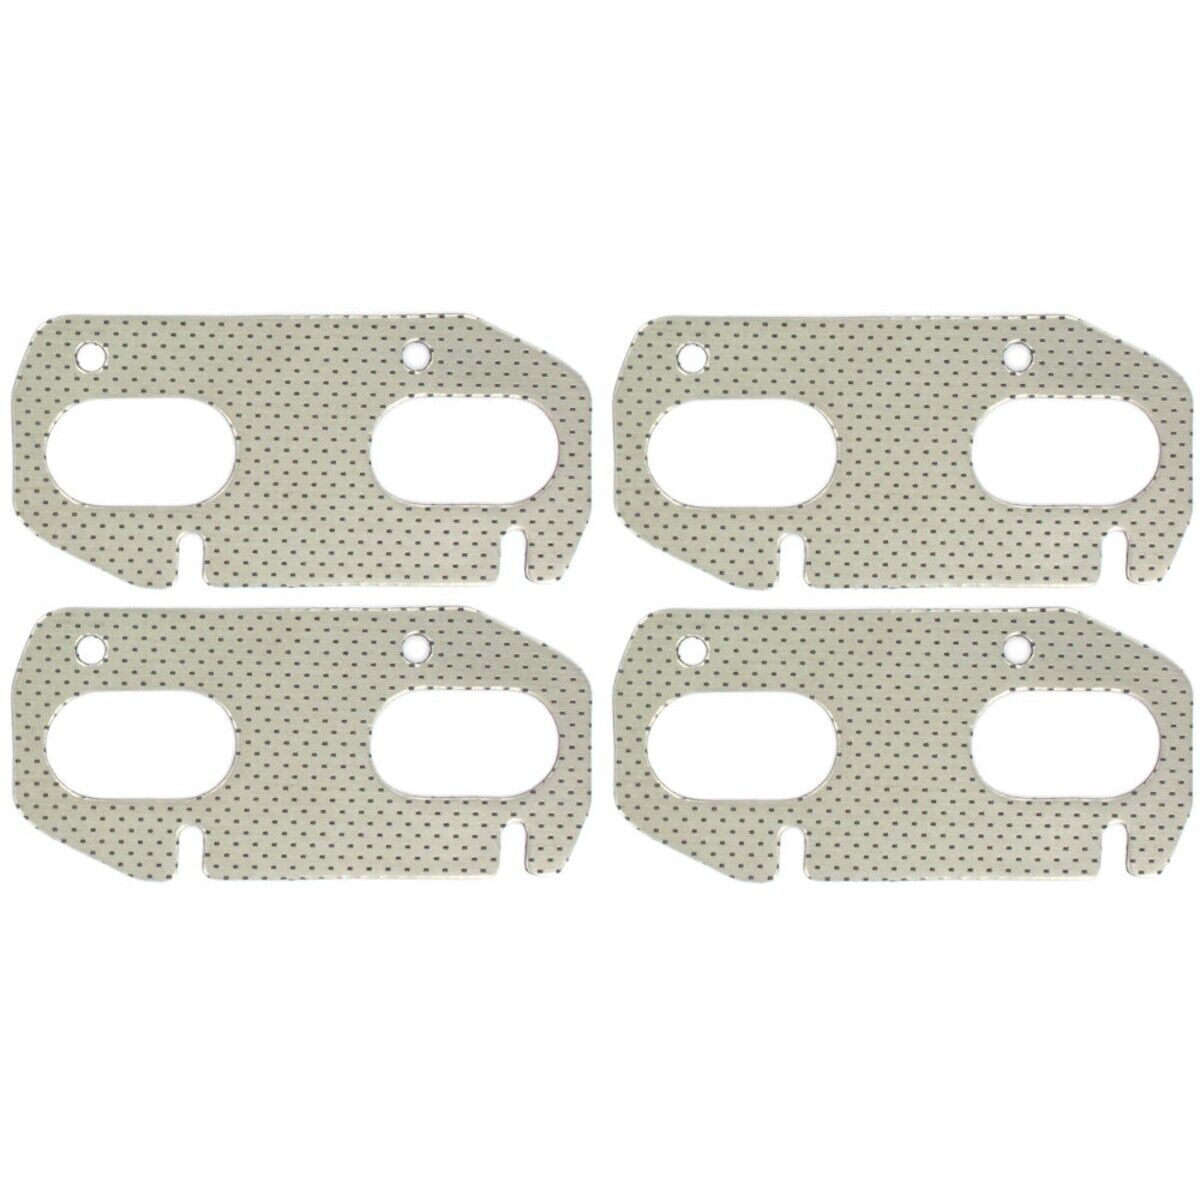 AMS4700 APEX Exhaust Manifold Gaskets Set for Mark Ford Mustang Navigator VIII